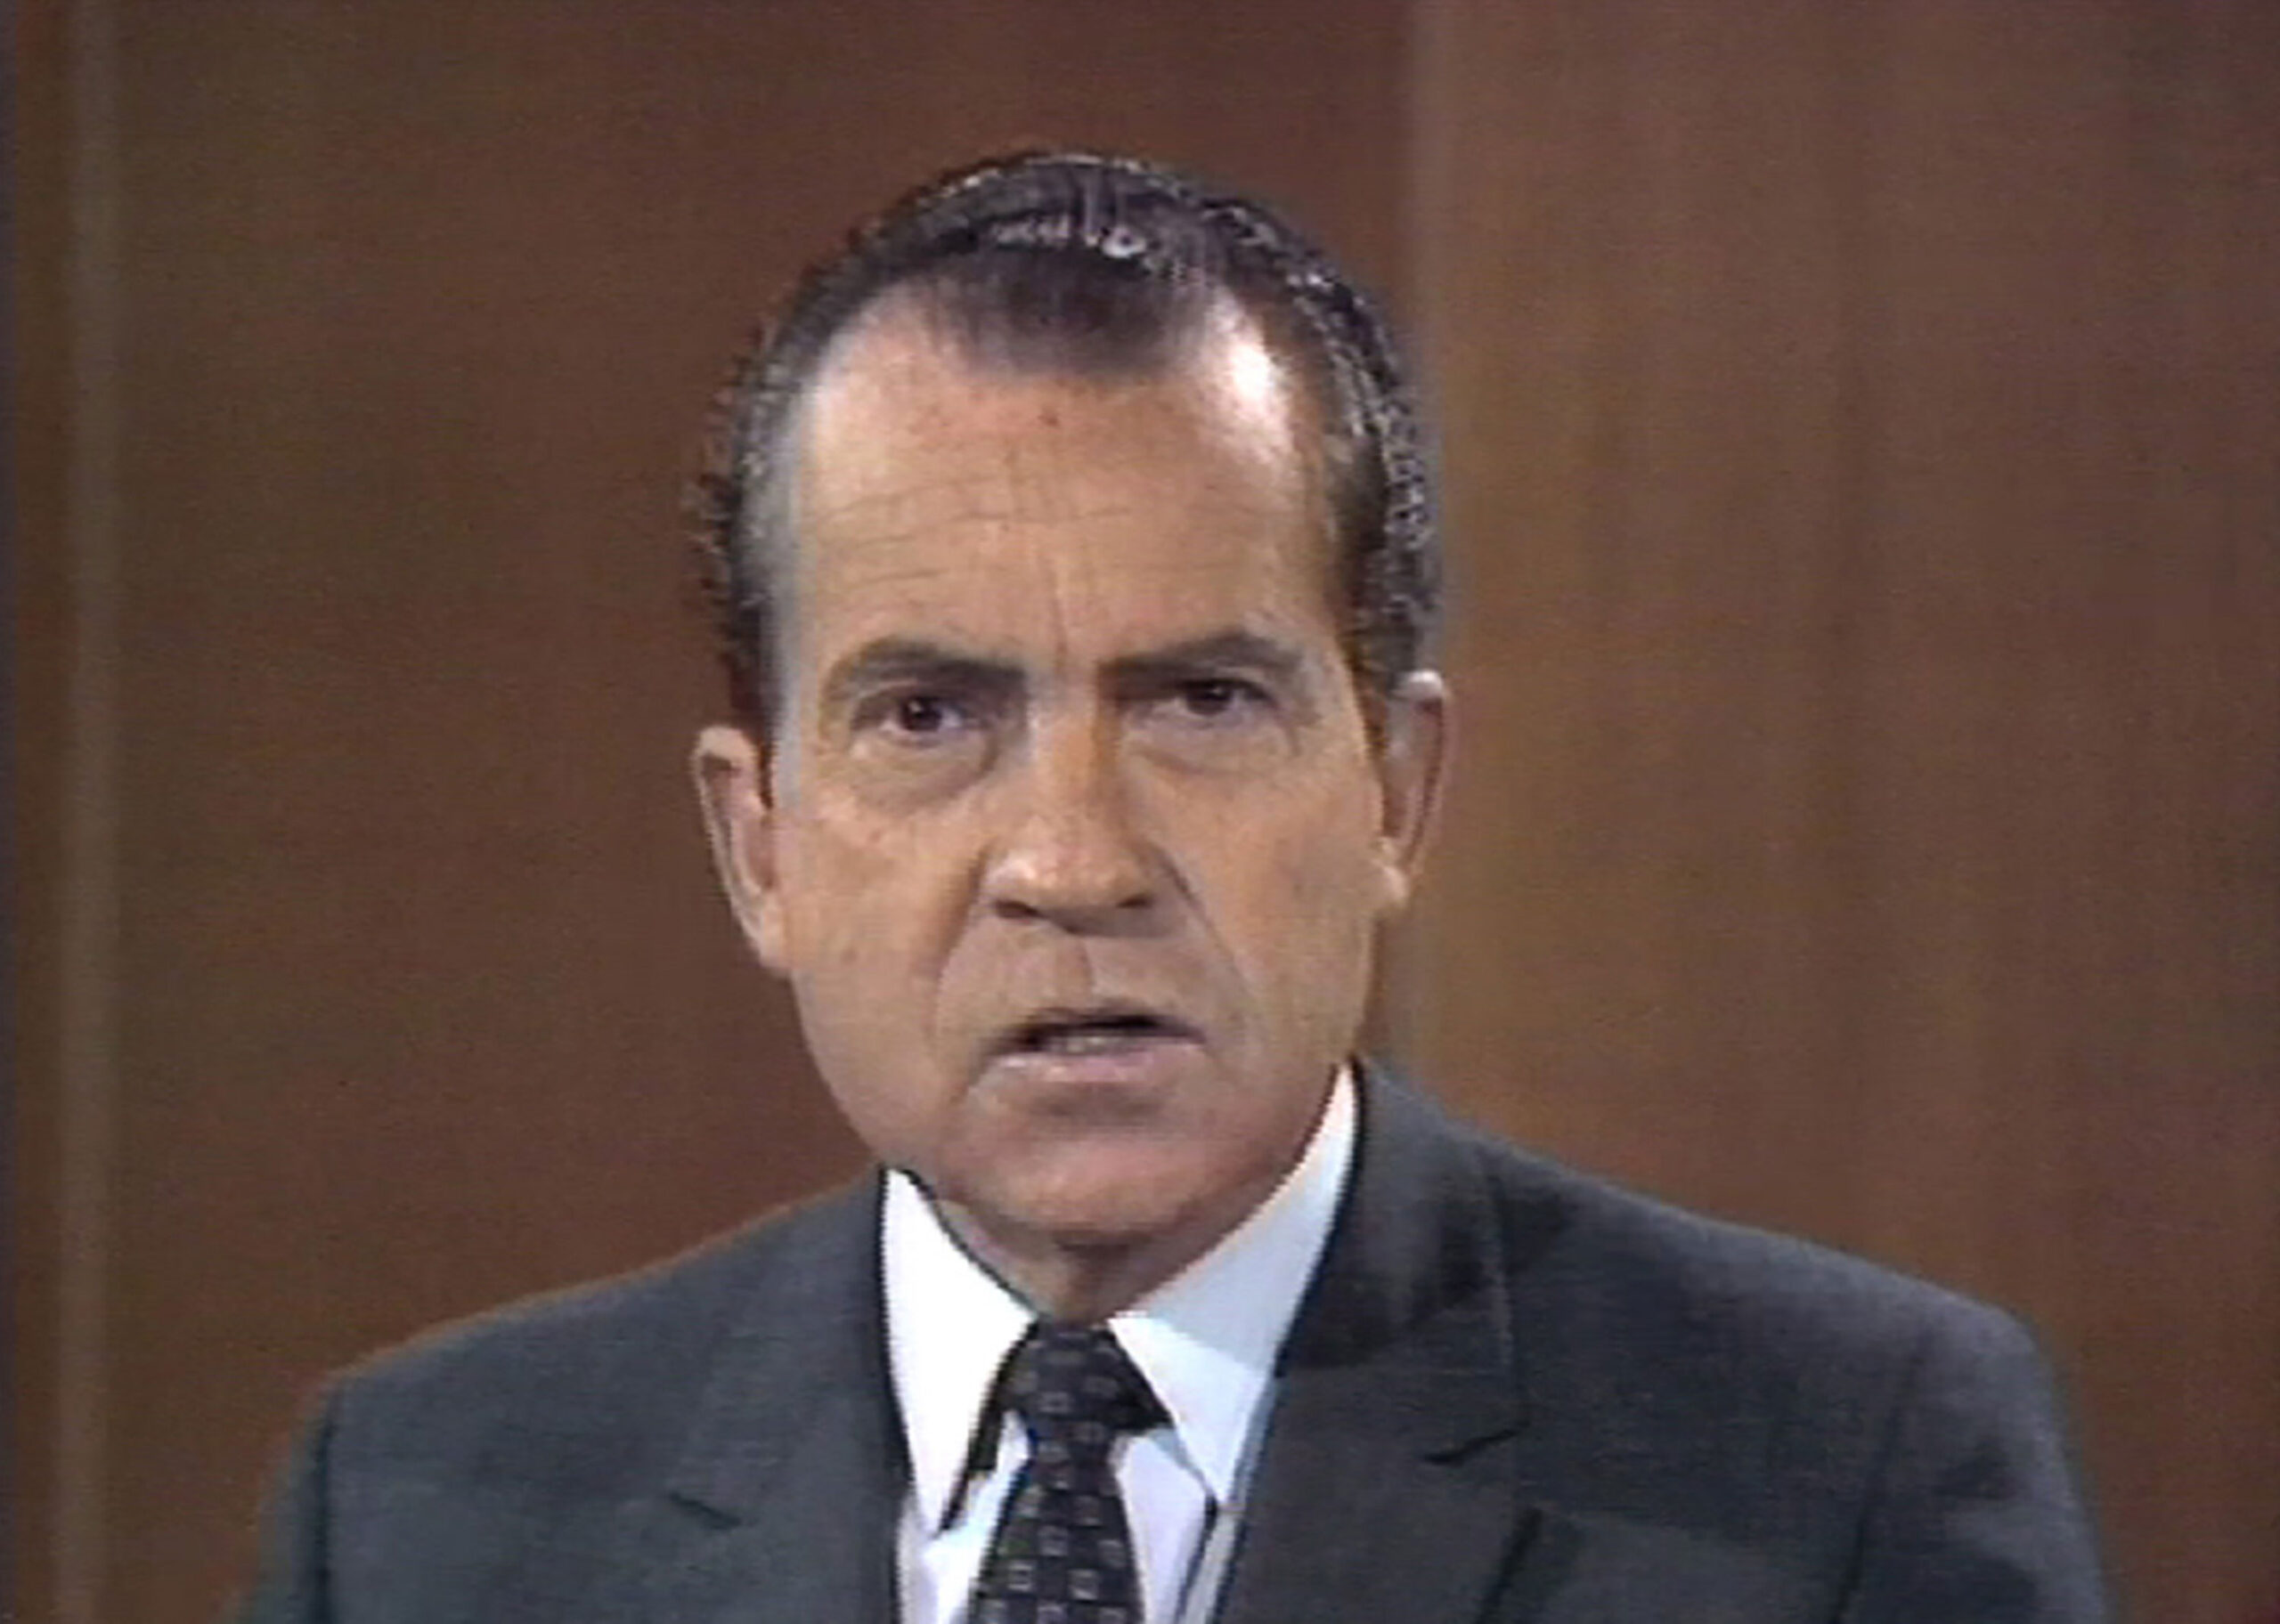 Nixon on Laugh In saying the iconic Sock it to Me